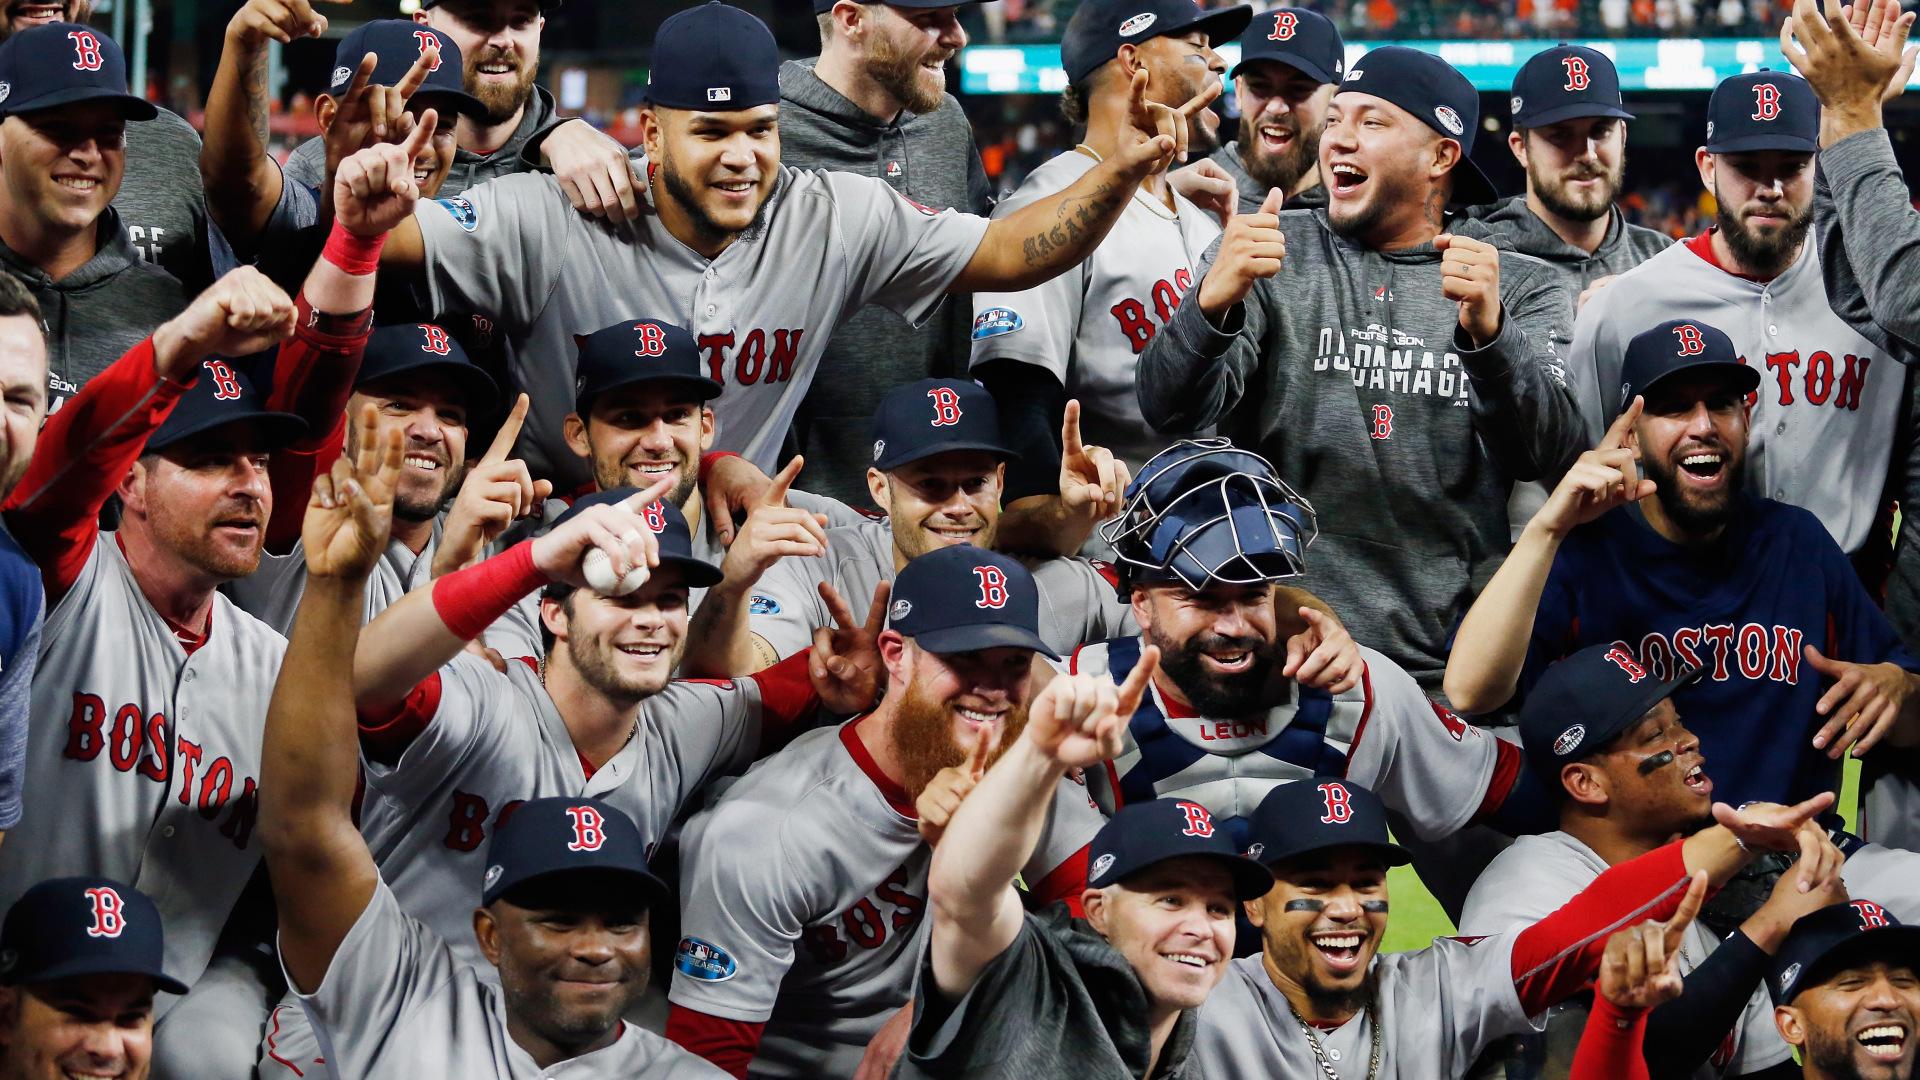 Boston Red Sox 2019 Season Preview By: Peter Snyder